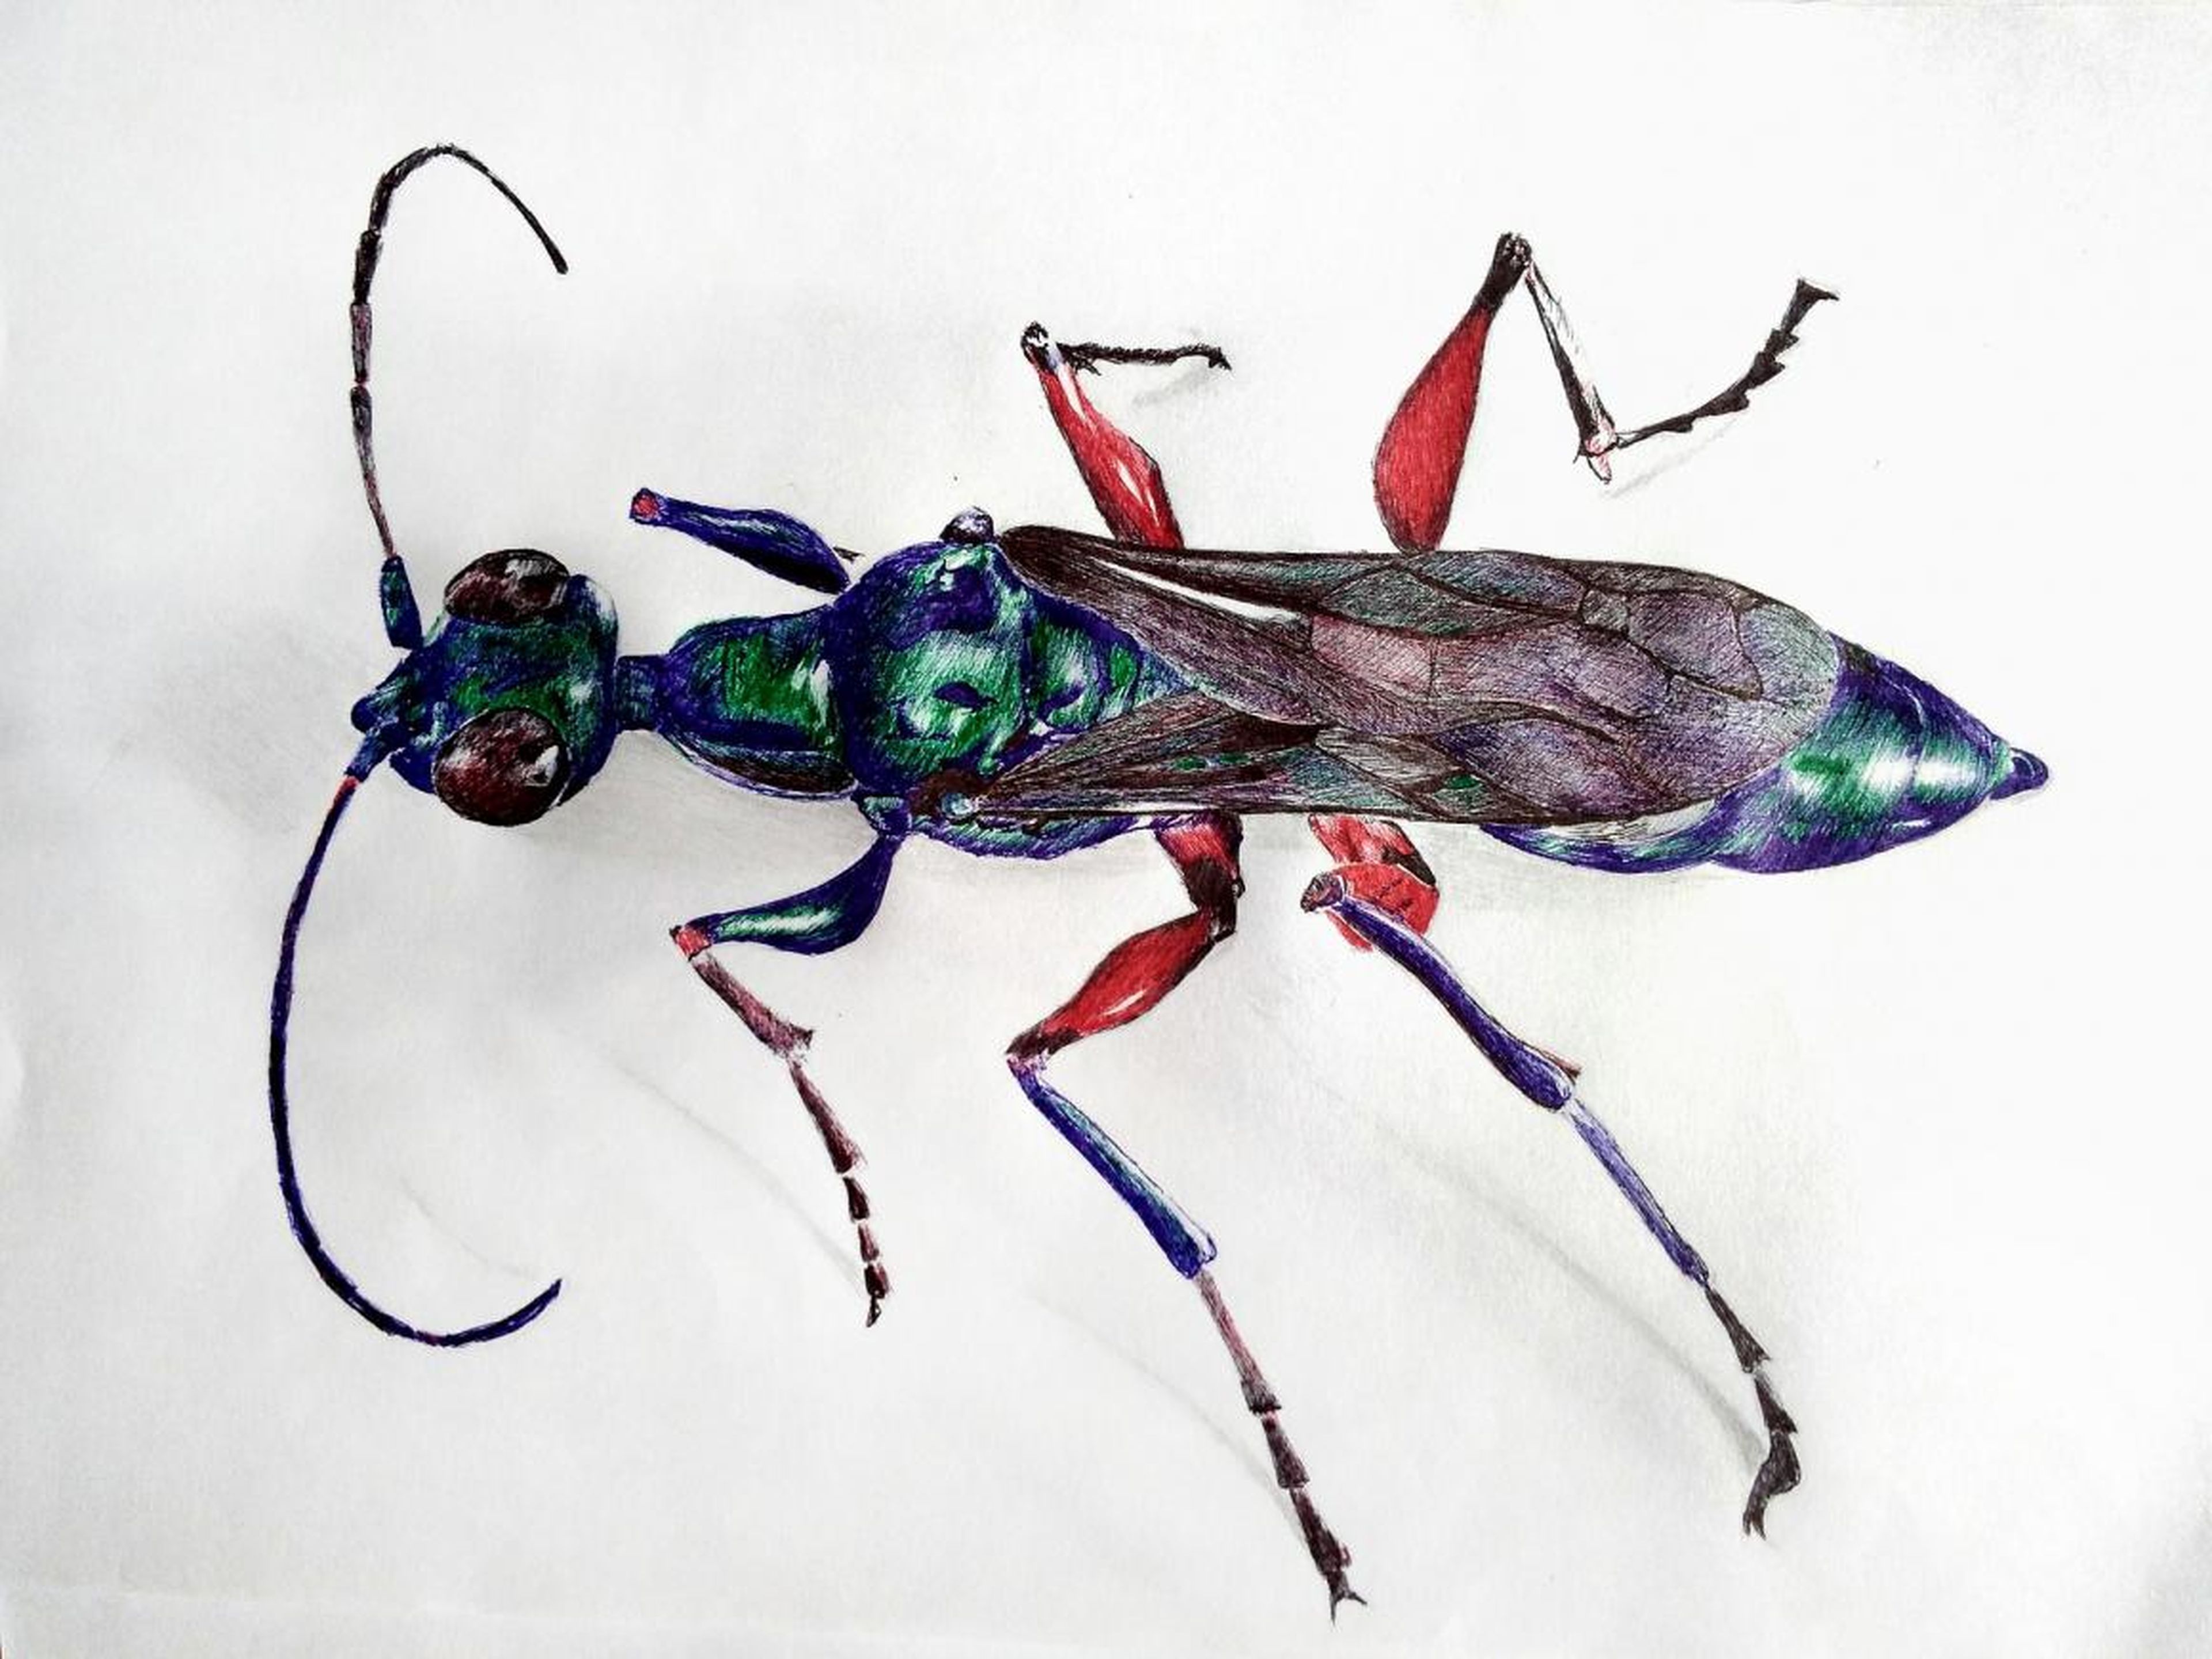 The emerald cockroach wasp, or jewel wasp, turns cockroaches into functional "zombies."